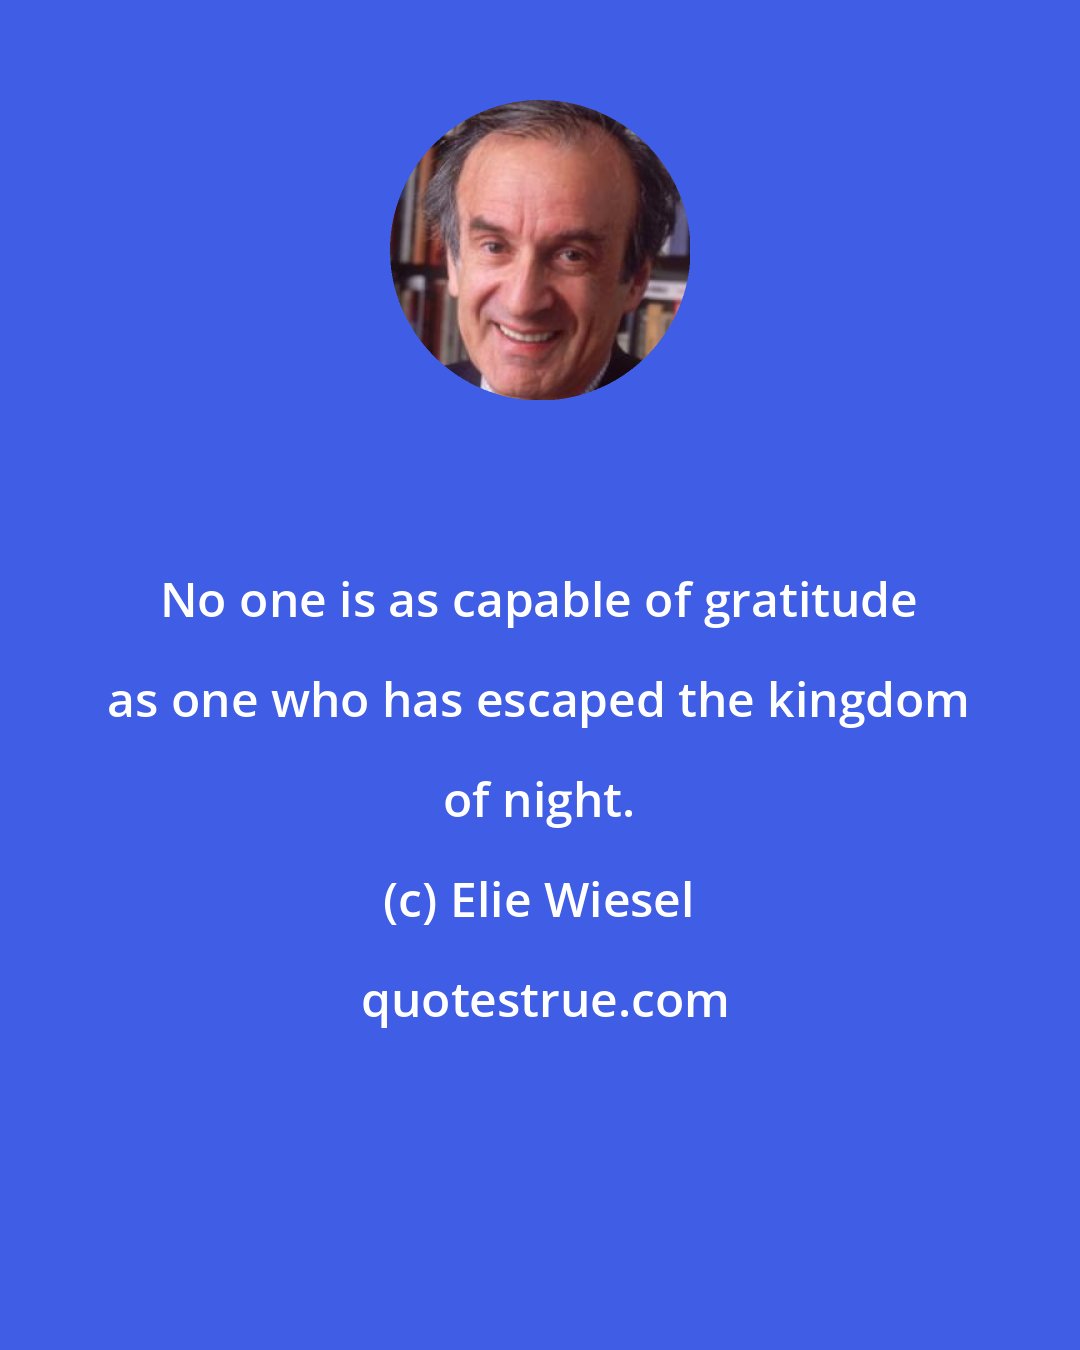 Elie Wiesel: No one is as capable of gratitude as one who has escaped the kingdom of night.